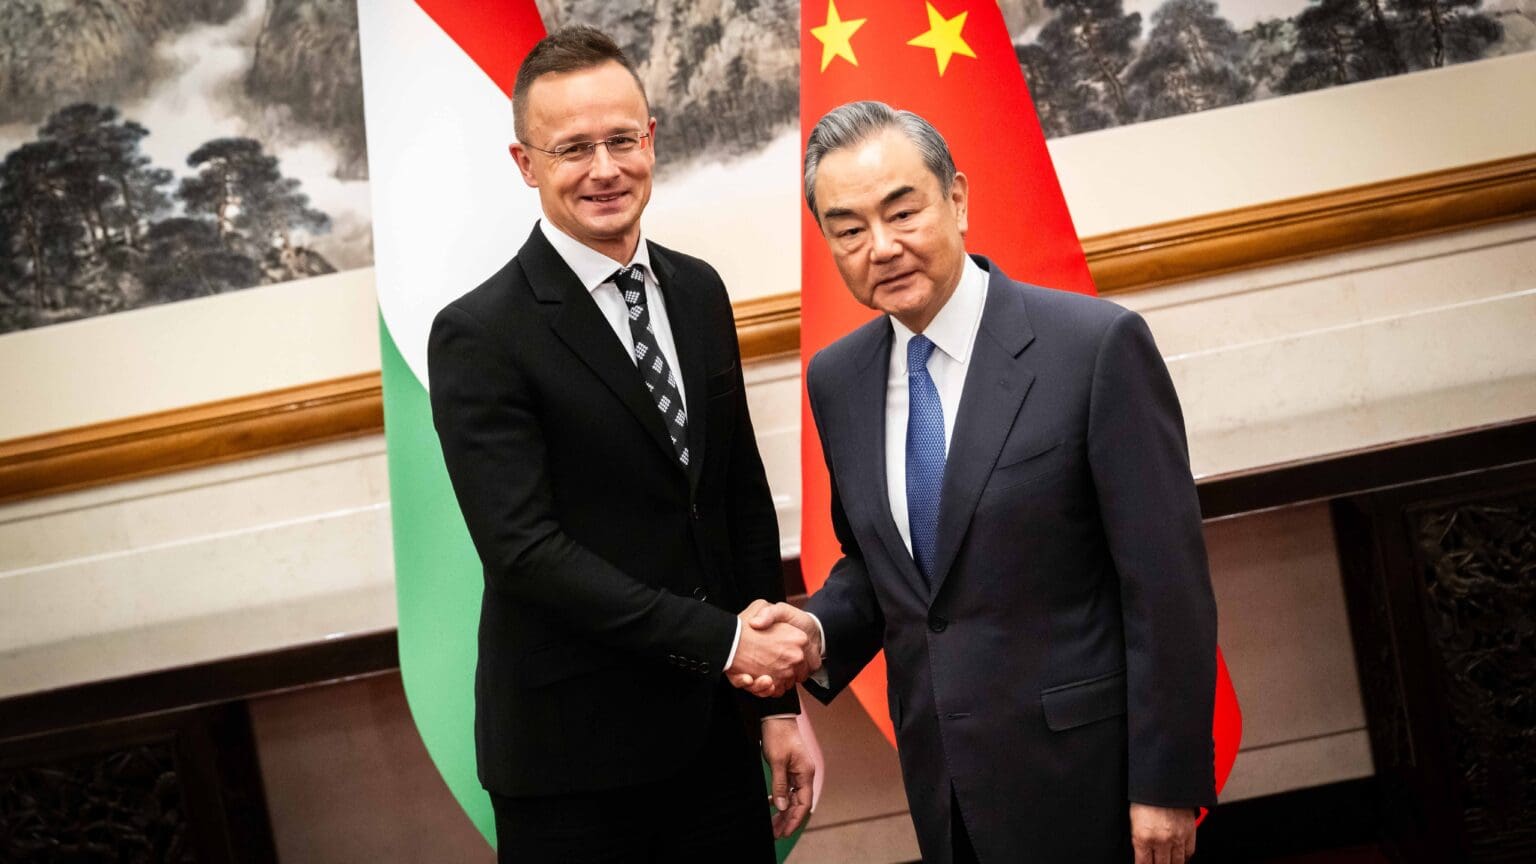 Hungarian Railway Developments on the Way under China’s Belt and Road Initiative